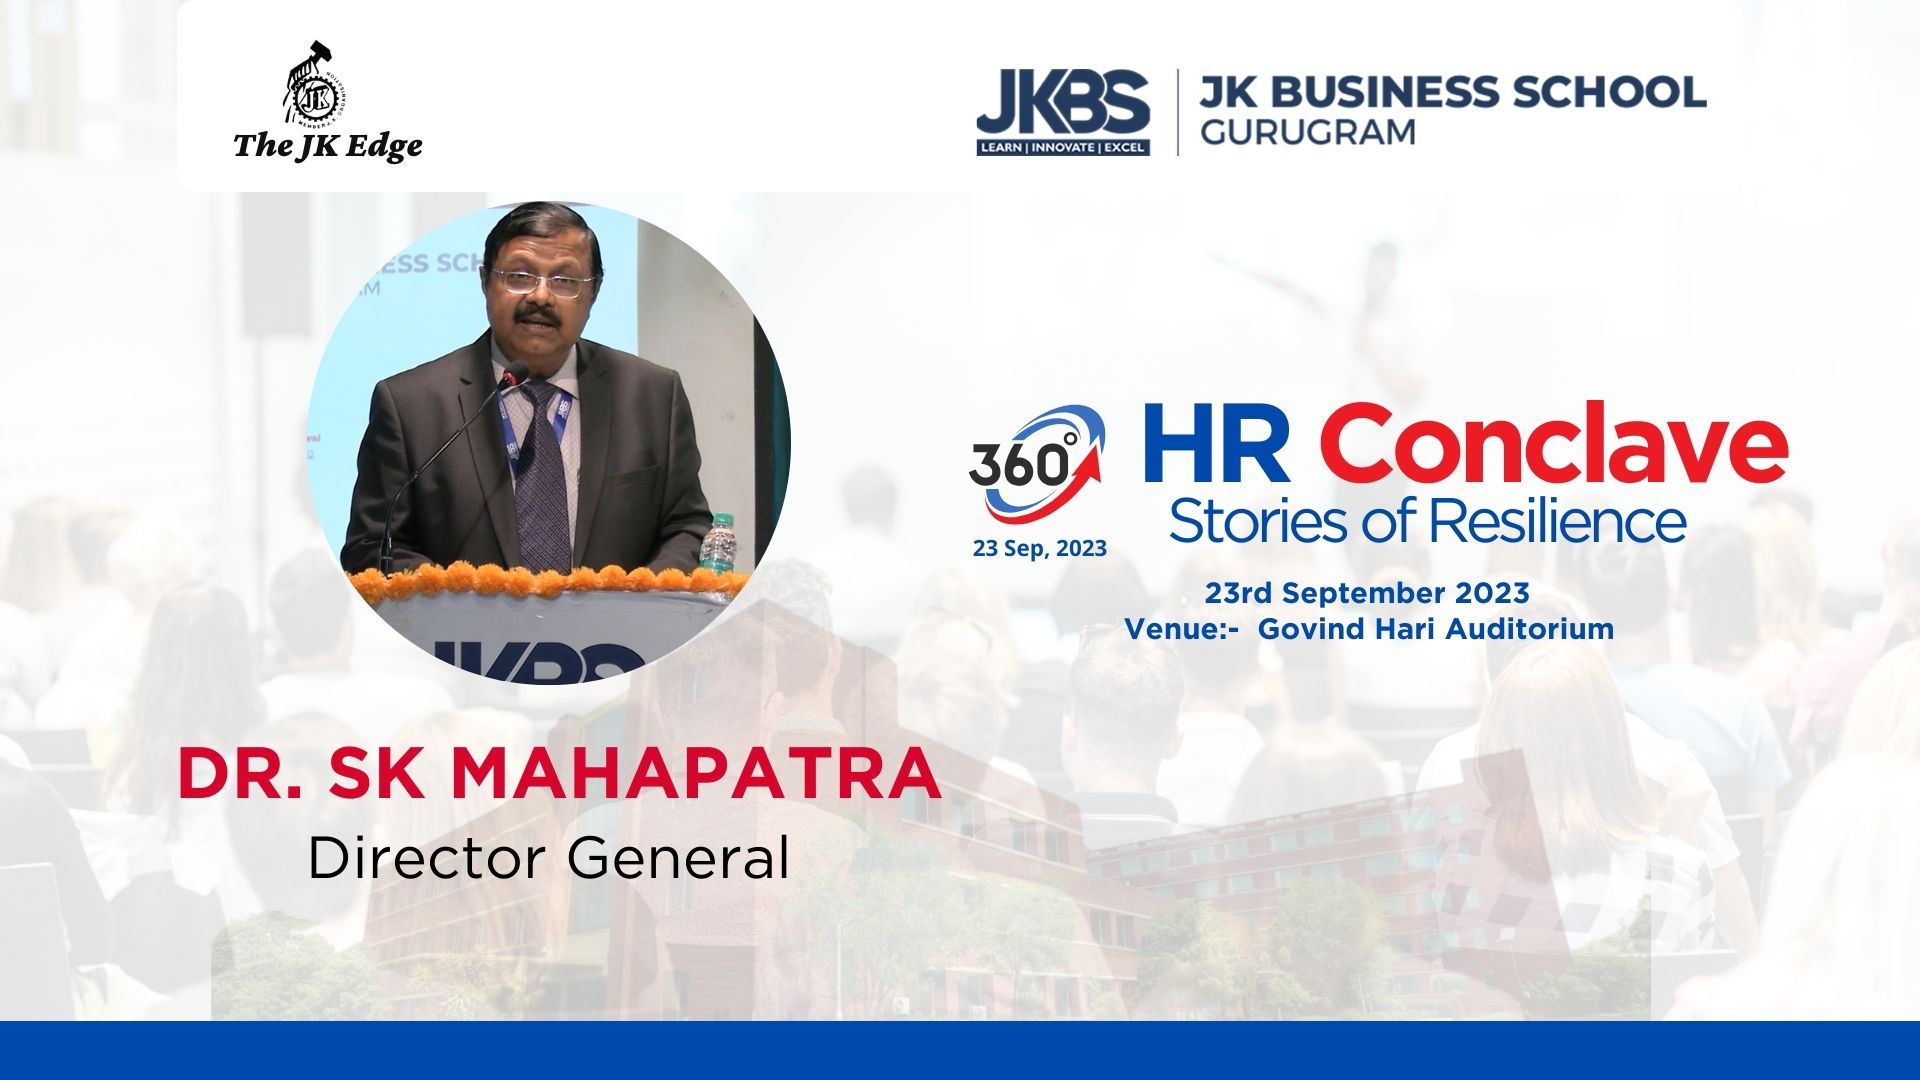 Welcome Address : Nurturing Resilience: Reflections on Mr. SK Mahapatra’s Opening Address at JK Business School’s HR Conclave